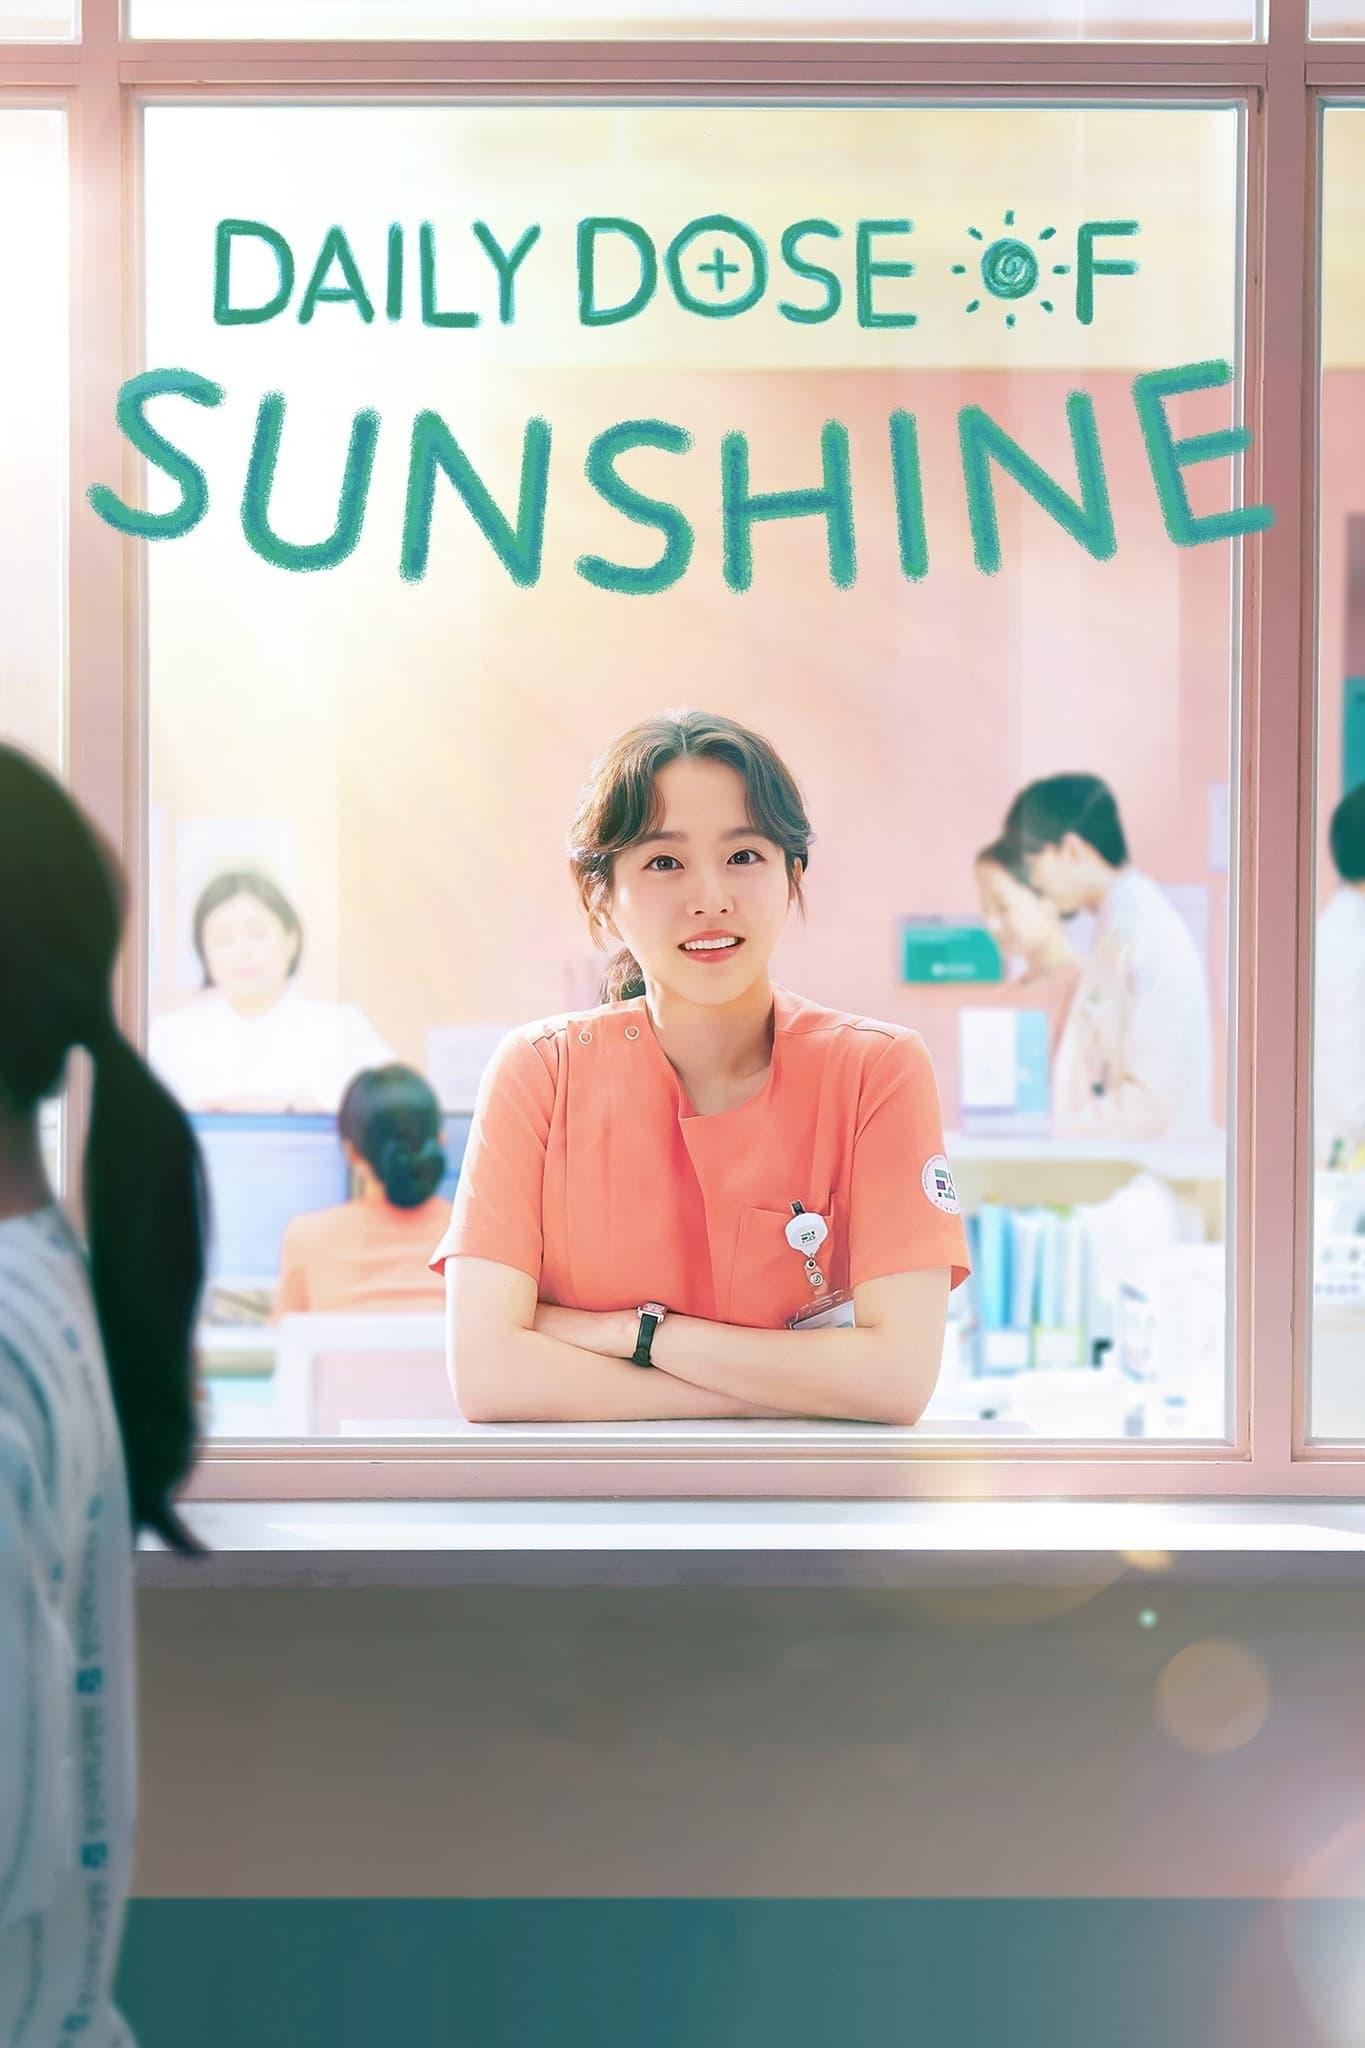 Daily Dose of Sunshine poster